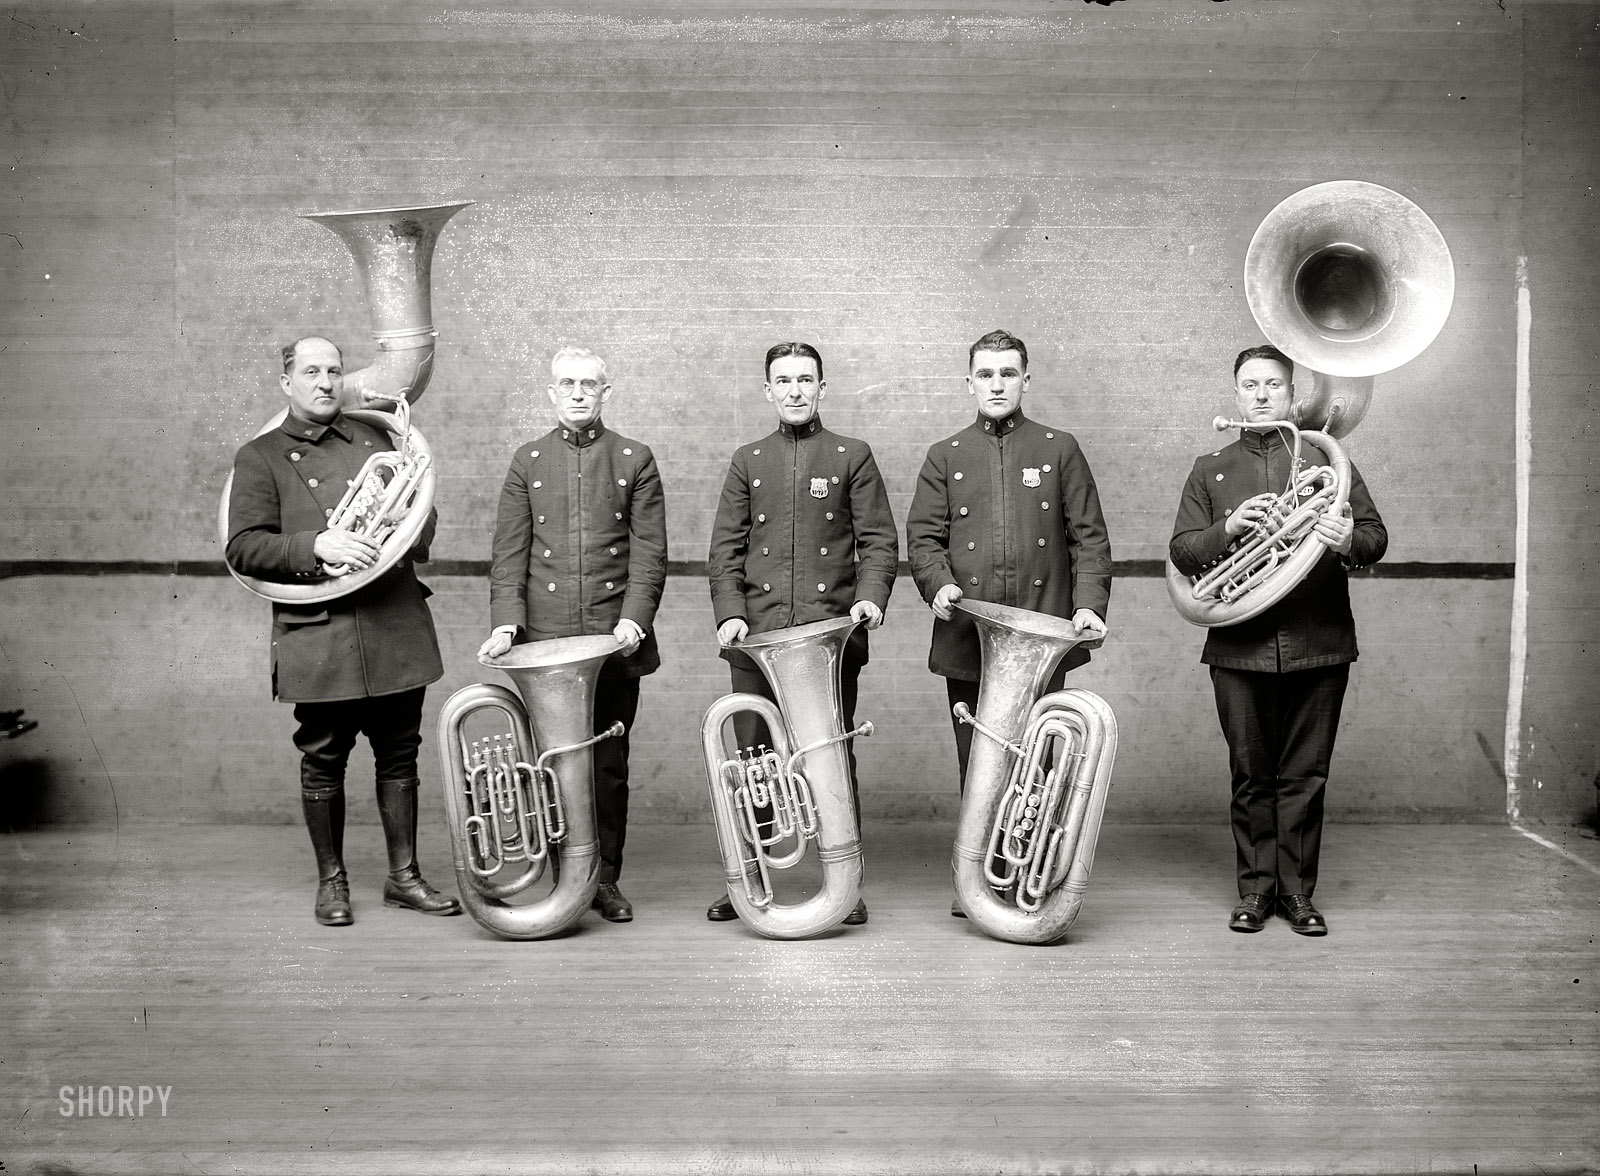 New York circa 1915. "Police tuba players." Shorpy is being beamed to you this week from on the road. (So far today from two WiFi enabled McDonald's parking lots along I-95. Posts and updates may be even more erratic than usual!) 5x7 glass negative, George Grantham Bain Collection. View full size.